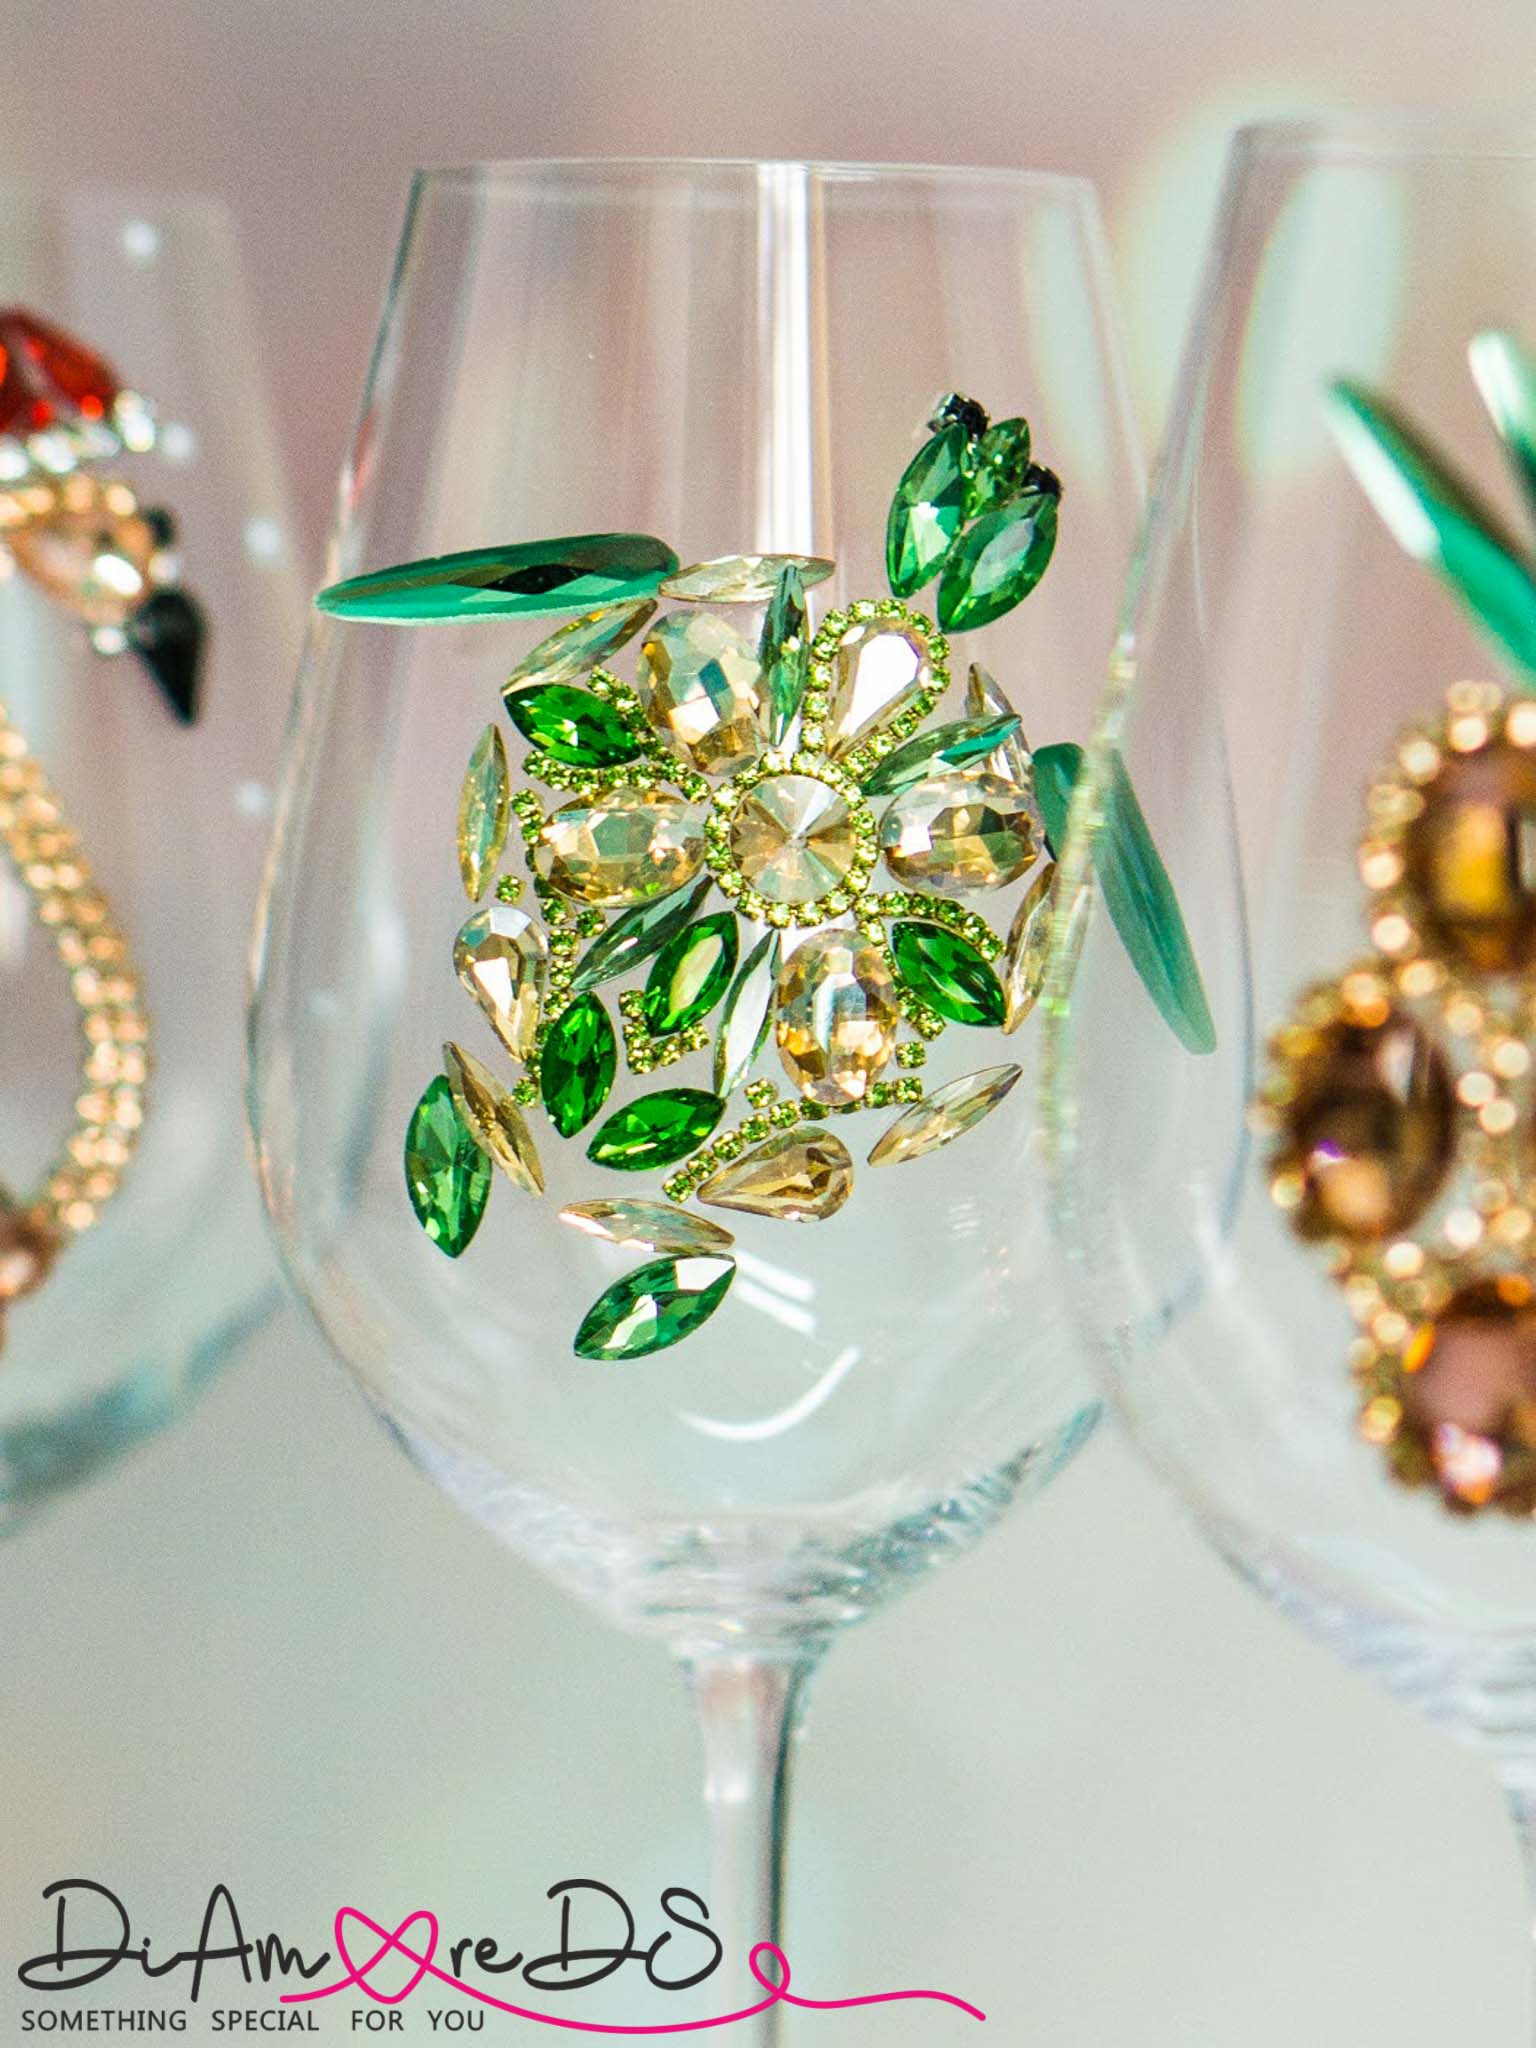 Artisanal wine glass with a sea turtle motif, handcrafted with green and gold crystals for a luxurious feel.